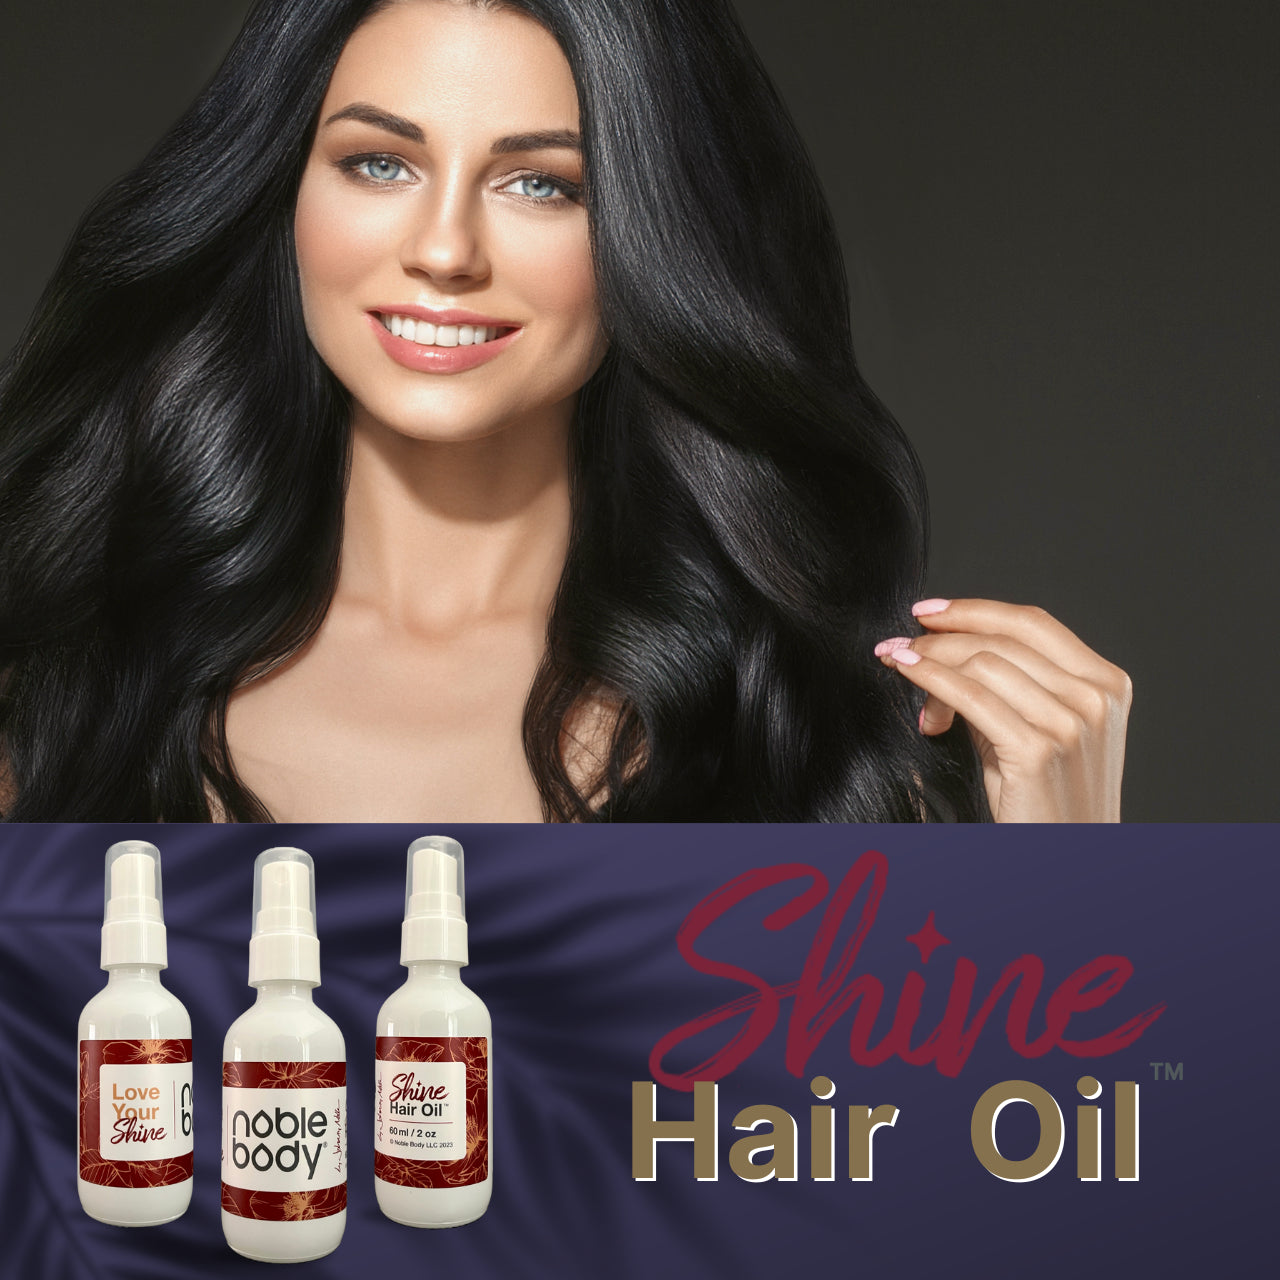 Noble Body Shine Hair Oil product photo with Attractive, smiling woman with jet black hair.